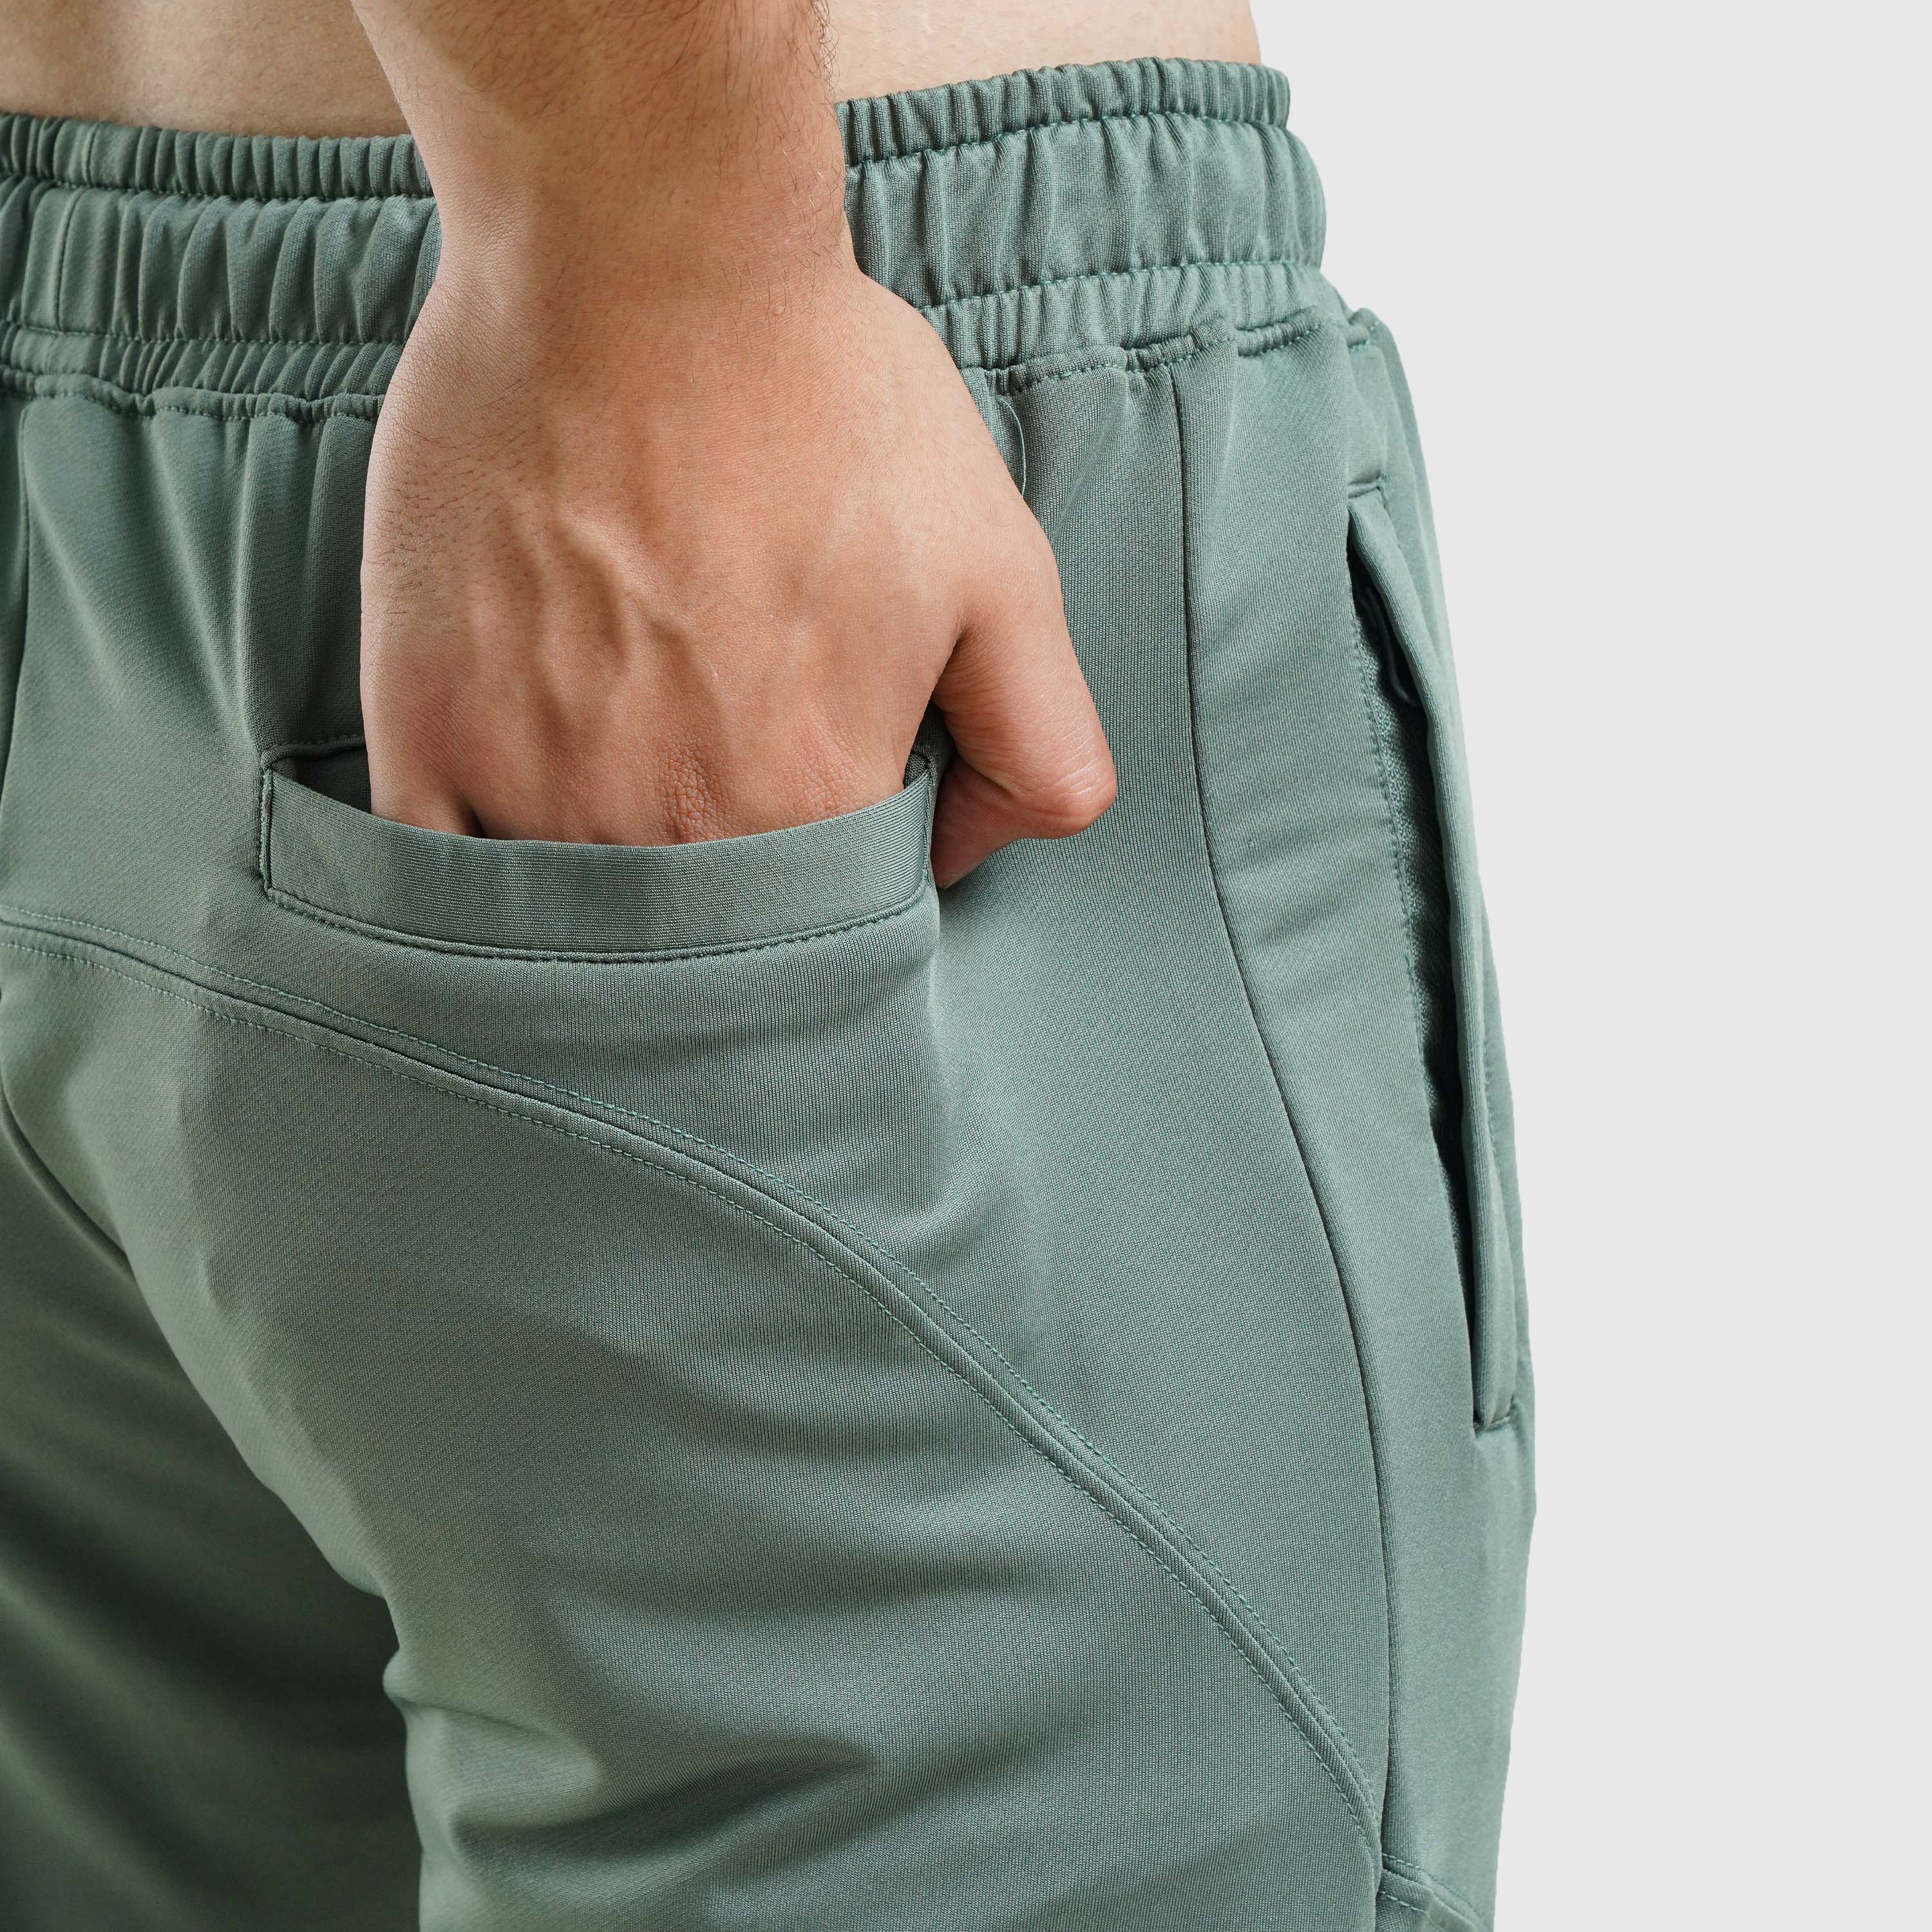 Rown Trousers (Green)